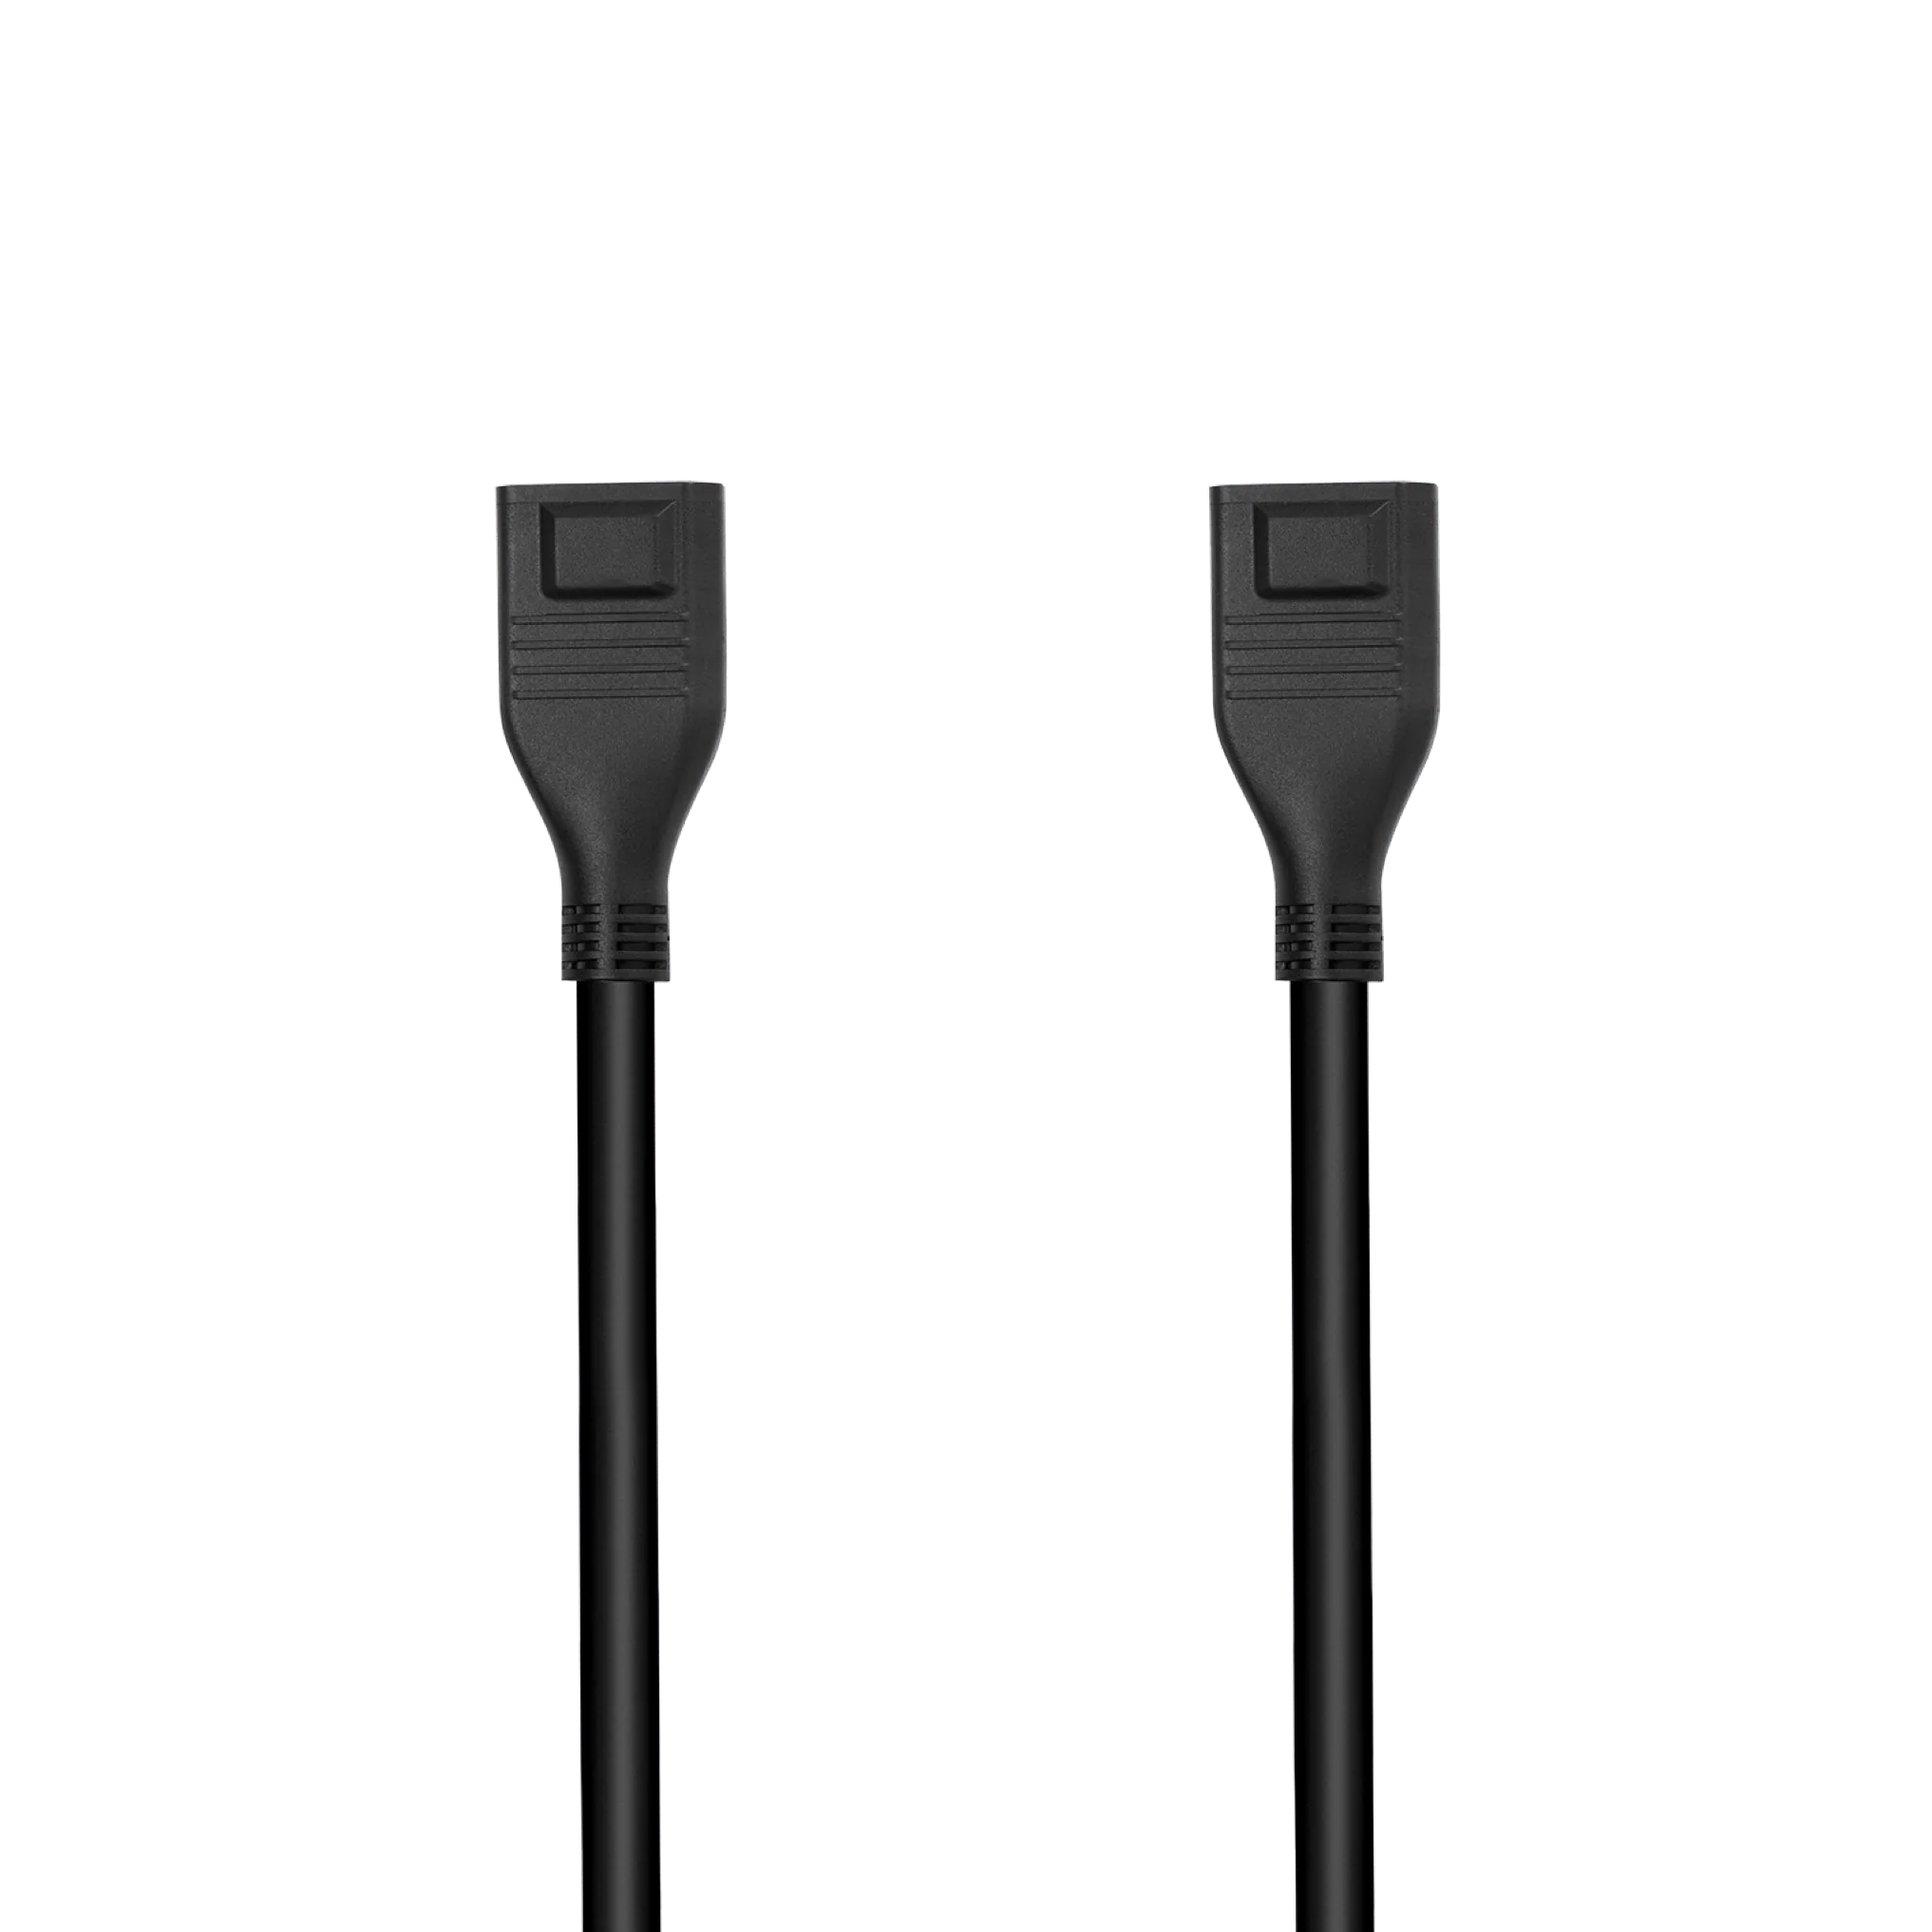 A pair of black ethernet cables on a white background for EcoFlow DELTA Max Extra Battery.